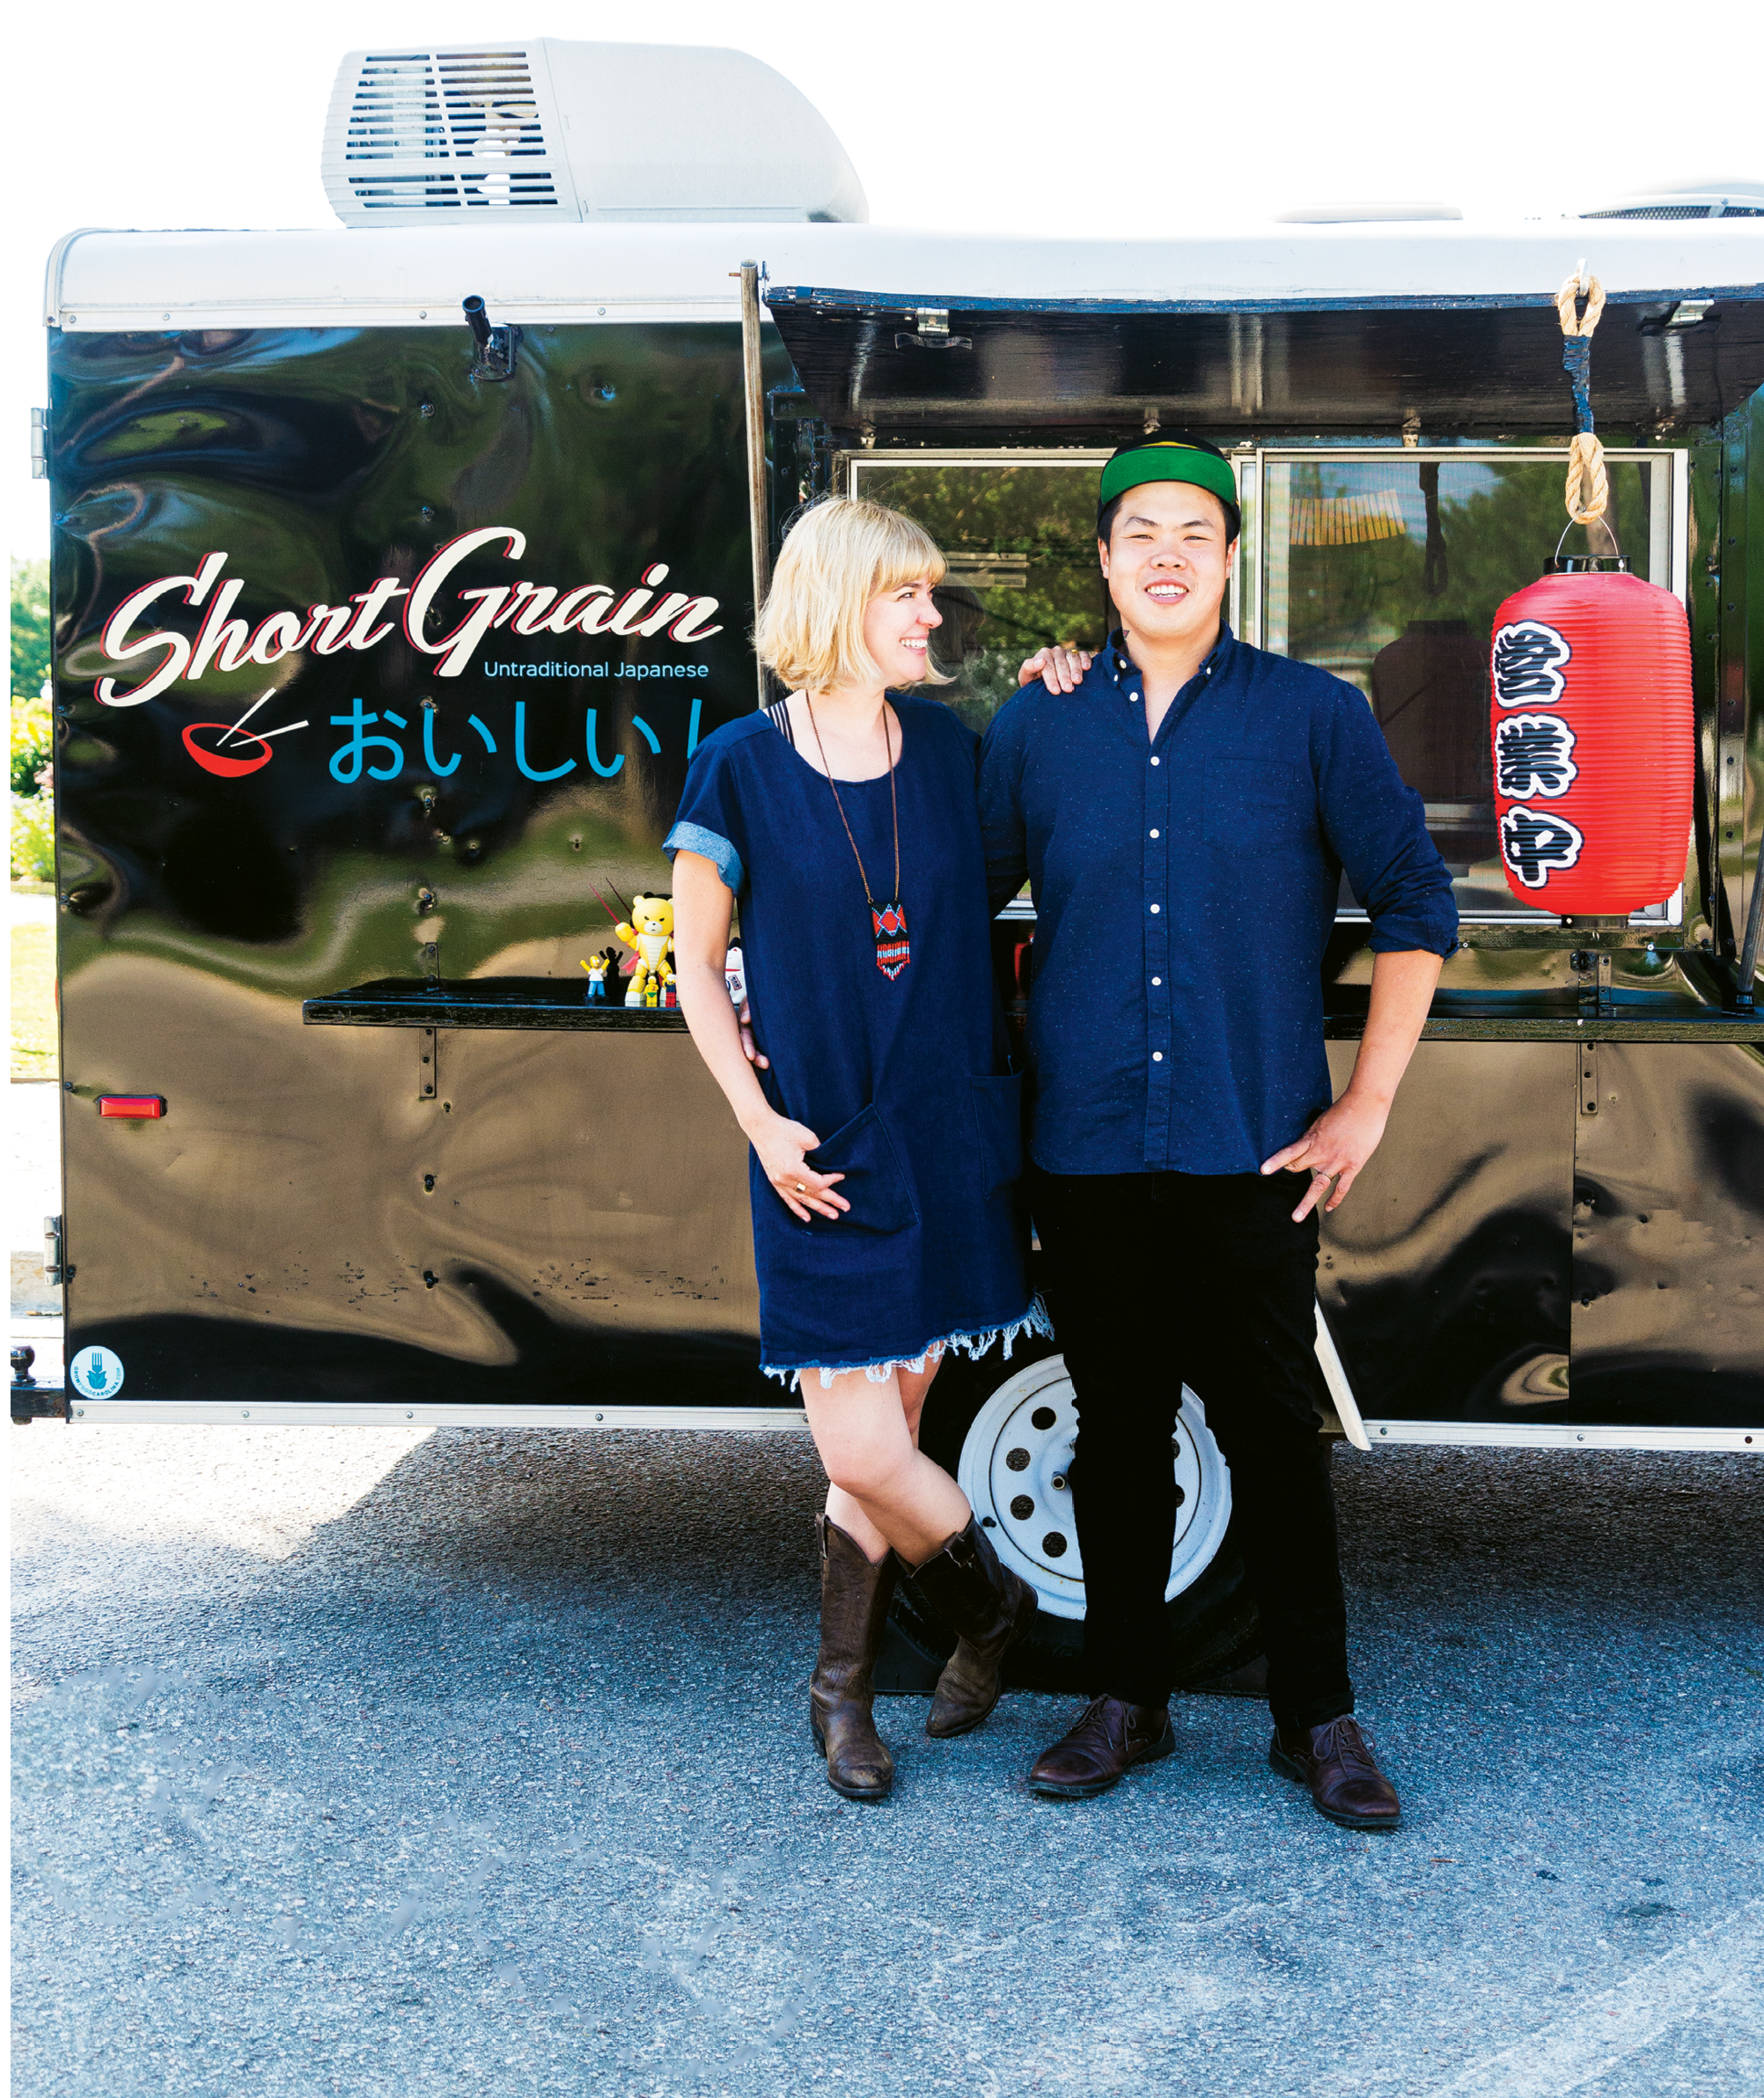 FOOD TRUCK: Short Grain; Shuai Wang partners up with his wife, Corrie, on their mobile eatery.